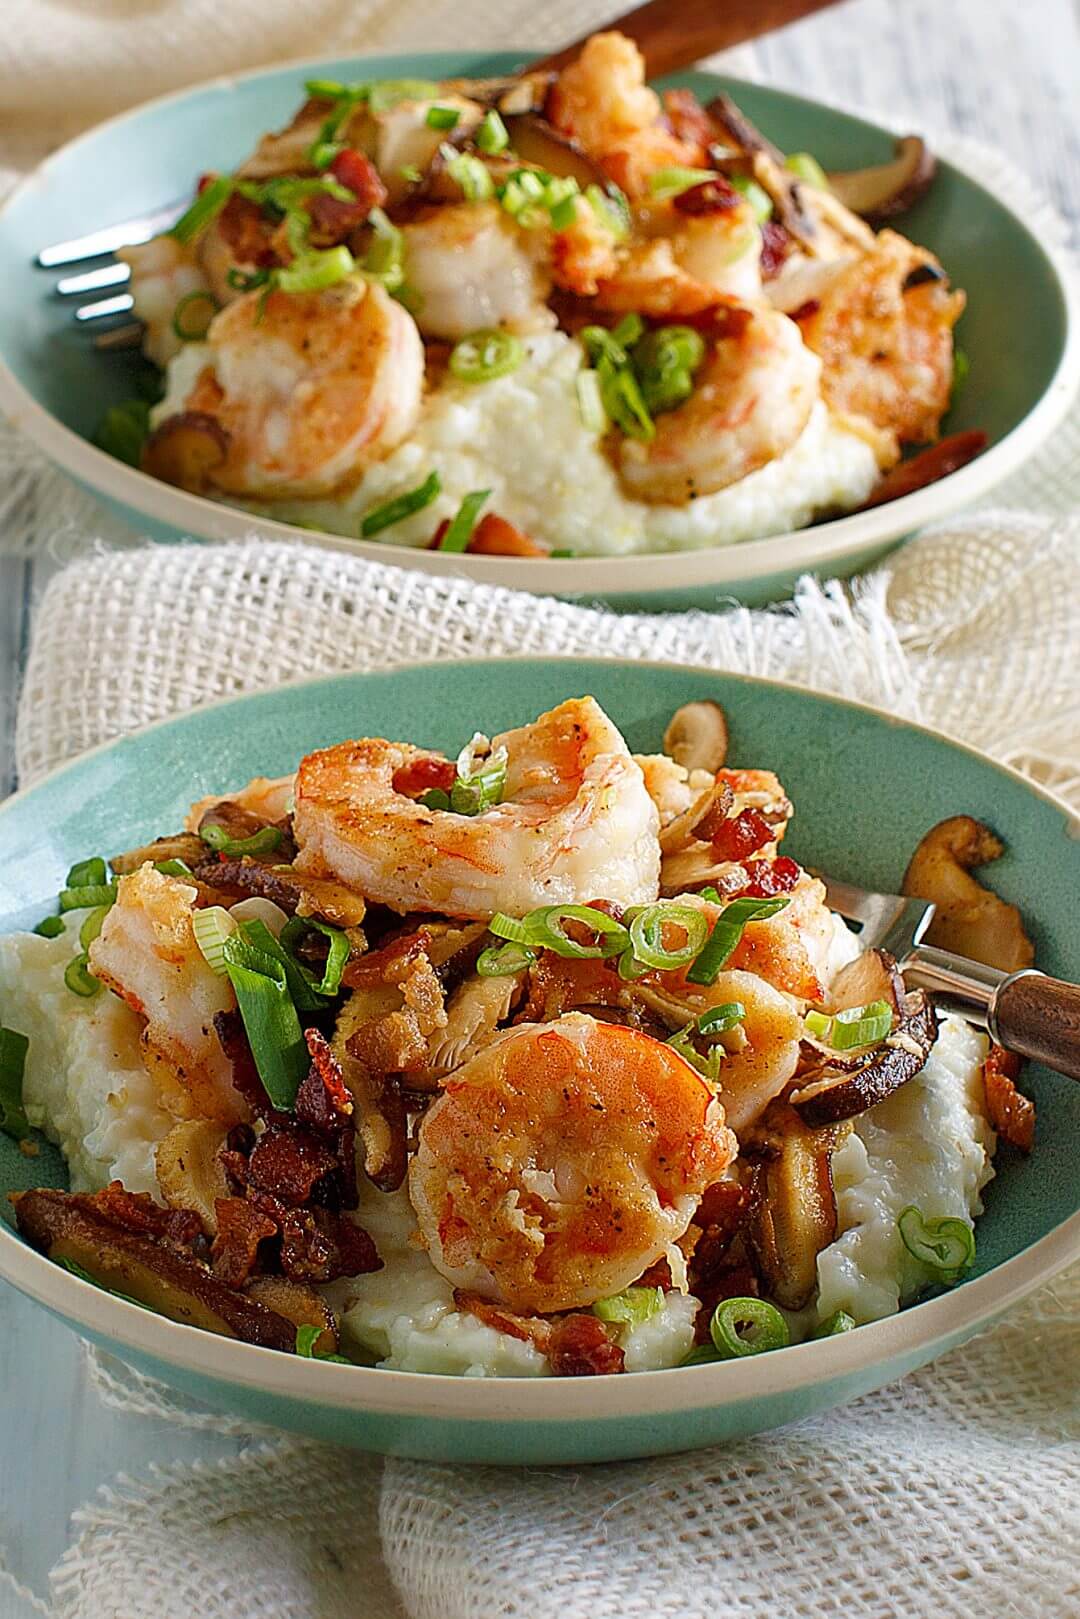 The Best 15 Shrimp and Grits Charleston Sc – Easy Recipes To Make at Home